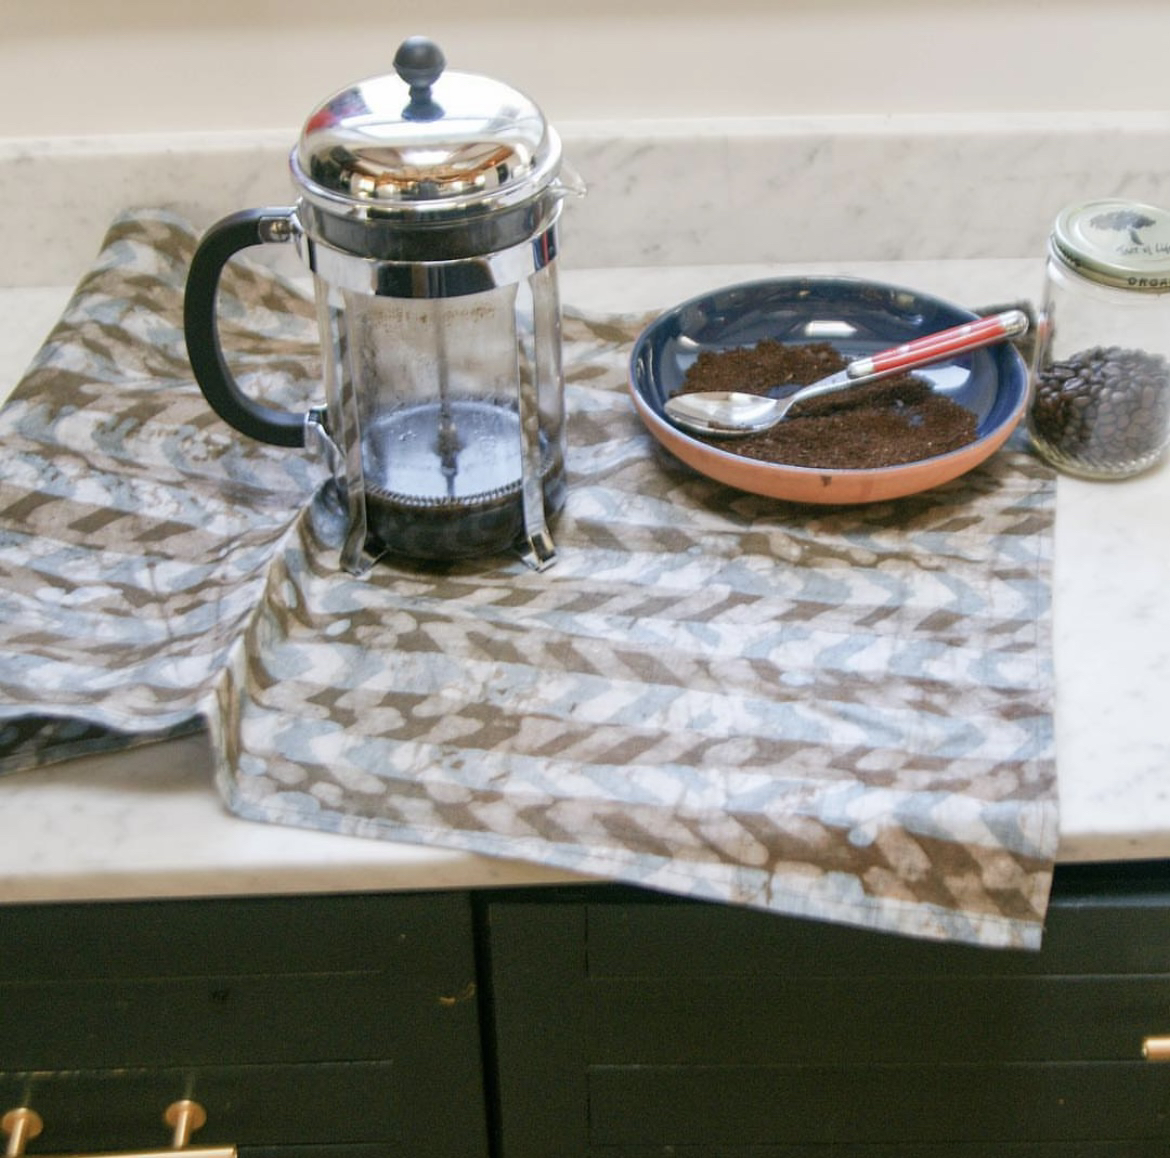 AM essentials ☕️ browse Rustic Loom tea towels to tie together your kitchen. .​​​​​​​​​​​​​​​​ .​​​​​​​​​​​​​​​​ .​​​​​​​​​​​​​​​​ .​​​​​​​​​​​​​​​​ rusticloom.com​​​​​​​​​​​​​​​​ ​​​​​​​​​​​​​​​​ .​​​​​​​​​​​​​​​​ .​​​​​​​​​​​​​​​​ .​​​​​​​​​​​​​​​​ #ho...